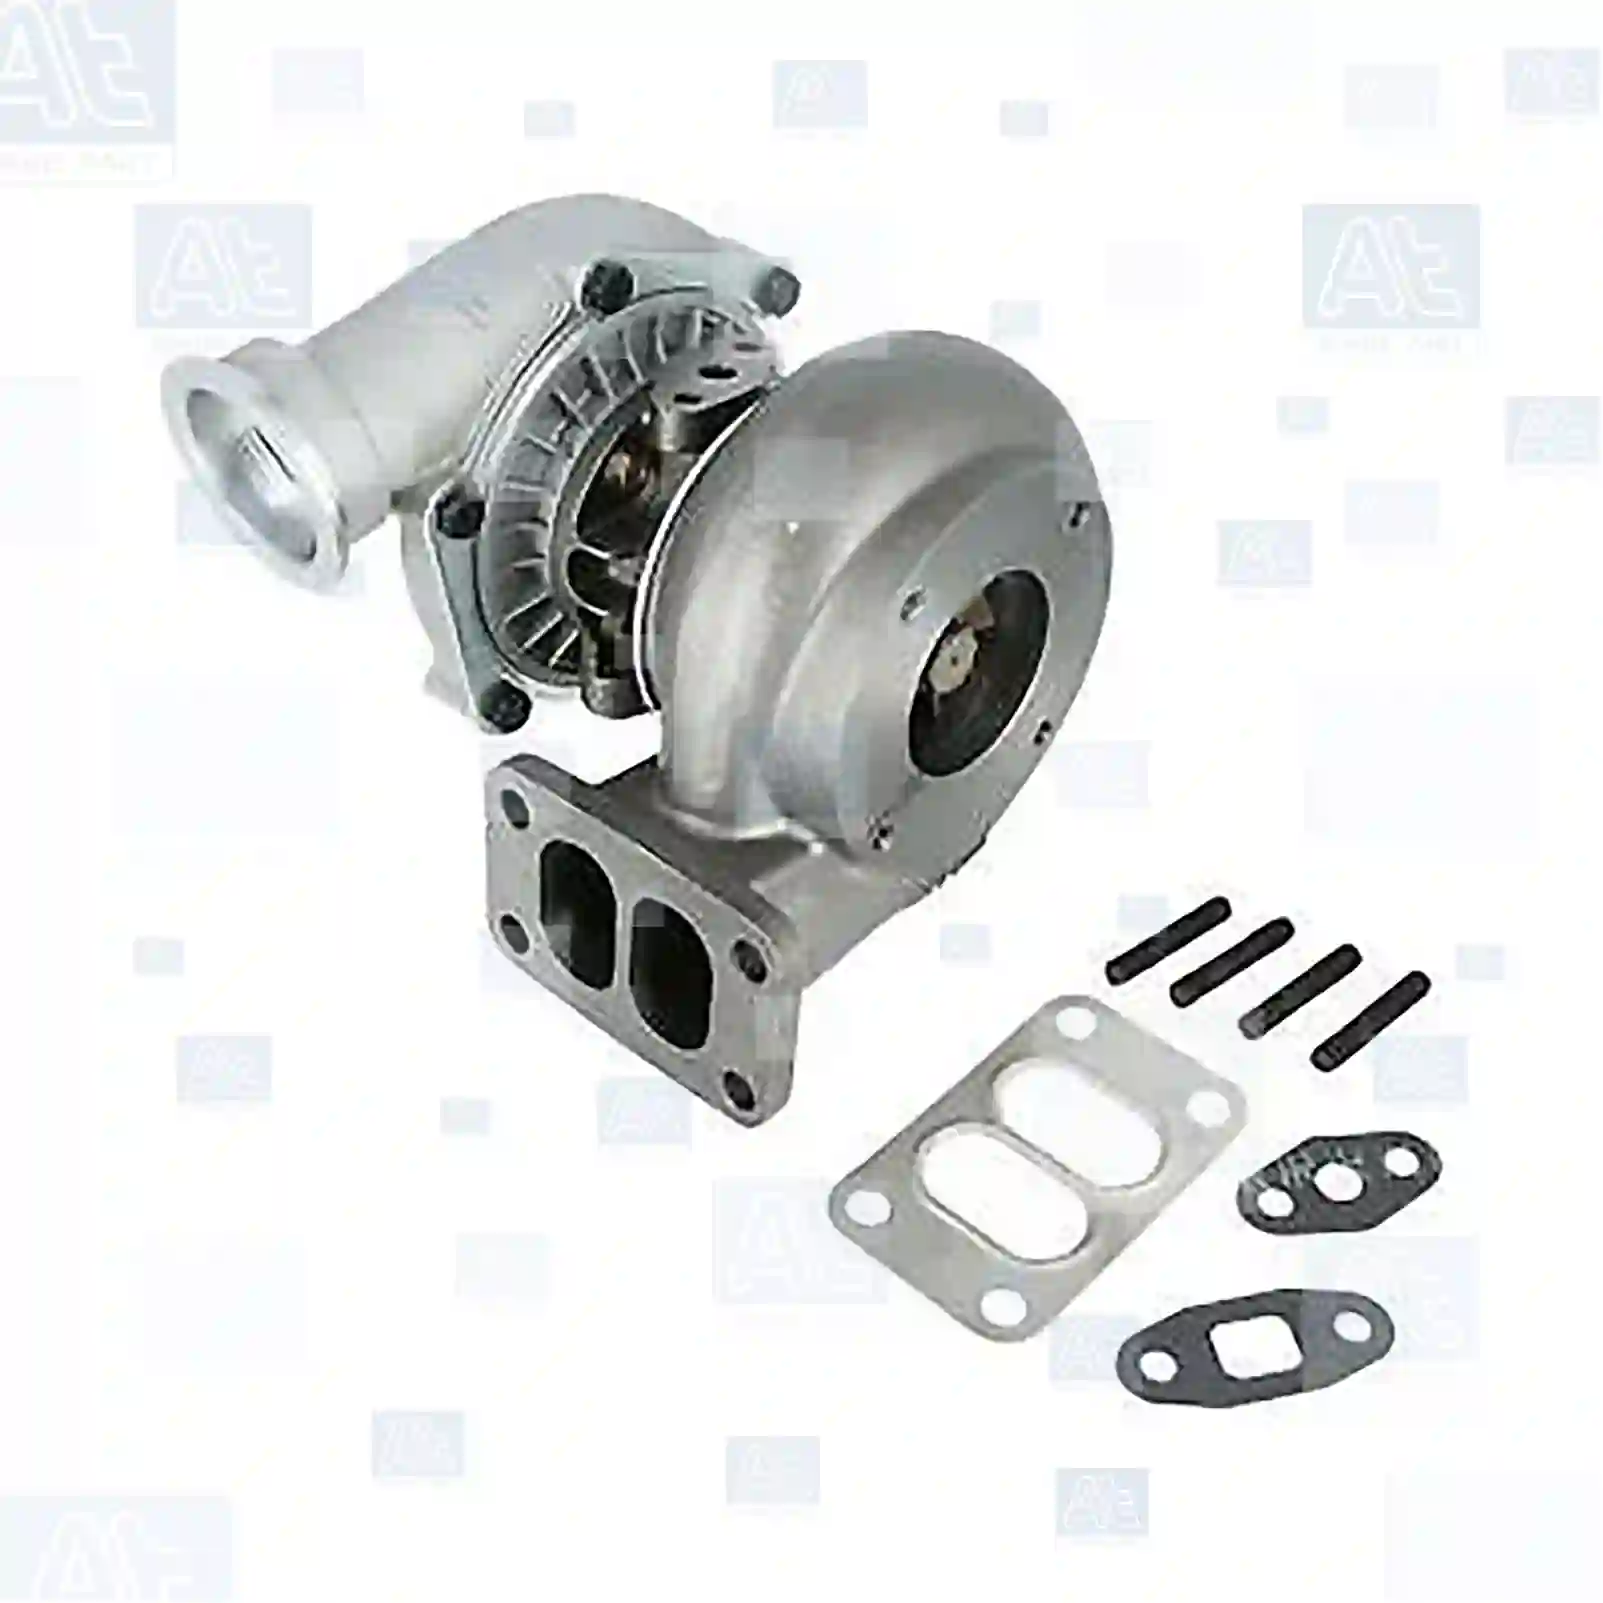 Turbocharger, with gasket kit, 77700364, 0366964199, 3520964299, 3520964399, 3520964899, 3520964999, 3520965099, 3520965199, 3520965299, 3520965399, 3520966299, 3520966399, 3520966799, 3520966899, 3520968299, 3520968399, 3520968499, 3520968599, 3660960099, 3660960199, 3660960299, 366096029980, 3660960399, 3660960499, 3660960699, 3660960799, 3660960899, 3660960999, 3660961099, 3660961299, 3660961399, 3660961499, 3660961599, 3660961699, 3660961899, 3660961999, 3660962299, 3660962699, 3660962799, 3660962899, 3660962999, 3660963099, 3660963499, 3660963899, 3660964299, 3660965599, 3660965799, 3660966199, 3660966699, 3660968699, 3760960099, 3760960399, 3760960699 ||  77700364 At Spare Part | Engine, Accelerator Pedal, Camshaft, Connecting Rod, Crankcase, Crankshaft, Cylinder Head, Engine Suspension Mountings, Exhaust Manifold, Exhaust Gas Recirculation, Filter Kits, Flywheel Housing, General Overhaul Kits, Engine, Intake Manifold, Oil Cleaner, Oil Cooler, Oil Filter, Oil Pump, Oil Sump, Piston & Liner, Sensor & Switch, Timing Case, Turbocharger, Cooling System, Belt Tensioner, Coolant Filter, Coolant Pipe, Corrosion Prevention Agent, Drive, Expansion Tank, Fan, Intercooler, Monitors & Gauges, Radiator, Thermostat, V-Belt / Timing belt, Water Pump, Fuel System, Electronical Injector Unit, Feed Pump, Fuel Filter, cpl., Fuel Gauge Sender,  Fuel Line, Fuel Pump, Fuel Tank, Injection Line Kit, Injection Pump, Exhaust System, Clutch & Pedal, Gearbox, Propeller Shaft, Axles, Brake System, Hubs & Wheels, Suspension, Leaf Spring, Universal Parts / Accessories, Steering, Electrical System, Cabin Turbocharger, with gasket kit, 77700364, 0366964199, 3520964299, 3520964399, 3520964899, 3520964999, 3520965099, 3520965199, 3520965299, 3520965399, 3520966299, 3520966399, 3520966799, 3520966899, 3520968299, 3520968399, 3520968499, 3520968599, 3660960099, 3660960199, 3660960299, 366096029980, 3660960399, 3660960499, 3660960699, 3660960799, 3660960899, 3660960999, 3660961099, 3660961299, 3660961399, 3660961499, 3660961599, 3660961699, 3660961899, 3660961999, 3660962299, 3660962699, 3660962799, 3660962899, 3660962999, 3660963099, 3660963499, 3660963899, 3660964299, 3660965599, 3660965799, 3660966199, 3660966699, 3660968699, 3760960099, 3760960399, 3760960699 ||  77700364 At Spare Part | Engine, Accelerator Pedal, Camshaft, Connecting Rod, Crankcase, Crankshaft, Cylinder Head, Engine Suspension Mountings, Exhaust Manifold, Exhaust Gas Recirculation, Filter Kits, Flywheel Housing, General Overhaul Kits, Engine, Intake Manifold, Oil Cleaner, Oil Cooler, Oil Filter, Oil Pump, Oil Sump, Piston & Liner, Sensor & Switch, Timing Case, Turbocharger, Cooling System, Belt Tensioner, Coolant Filter, Coolant Pipe, Corrosion Prevention Agent, Drive, Expansion Tank, Fan, Intercooler, Monitors & Gauges, Radiator, Thermostat, V-Belt / Timing belt, Water Pump, Fuel System, Electronical Injector Unit, Feed Pump, Fuel Filter, cpl., Fuel Gauge Sender,  Fuel Line, Fuel Pump, Fuel Tank, Injection Line Kit, Injection Pump, Exhaust System, Clutch & Pedal, Gearbox, Propeller Shaft, Axles, Brake System, Hubs & Wheels, Suspension, Leaf Spring, Universal Parts / Accessories, Steering, Electrical System, Cabin